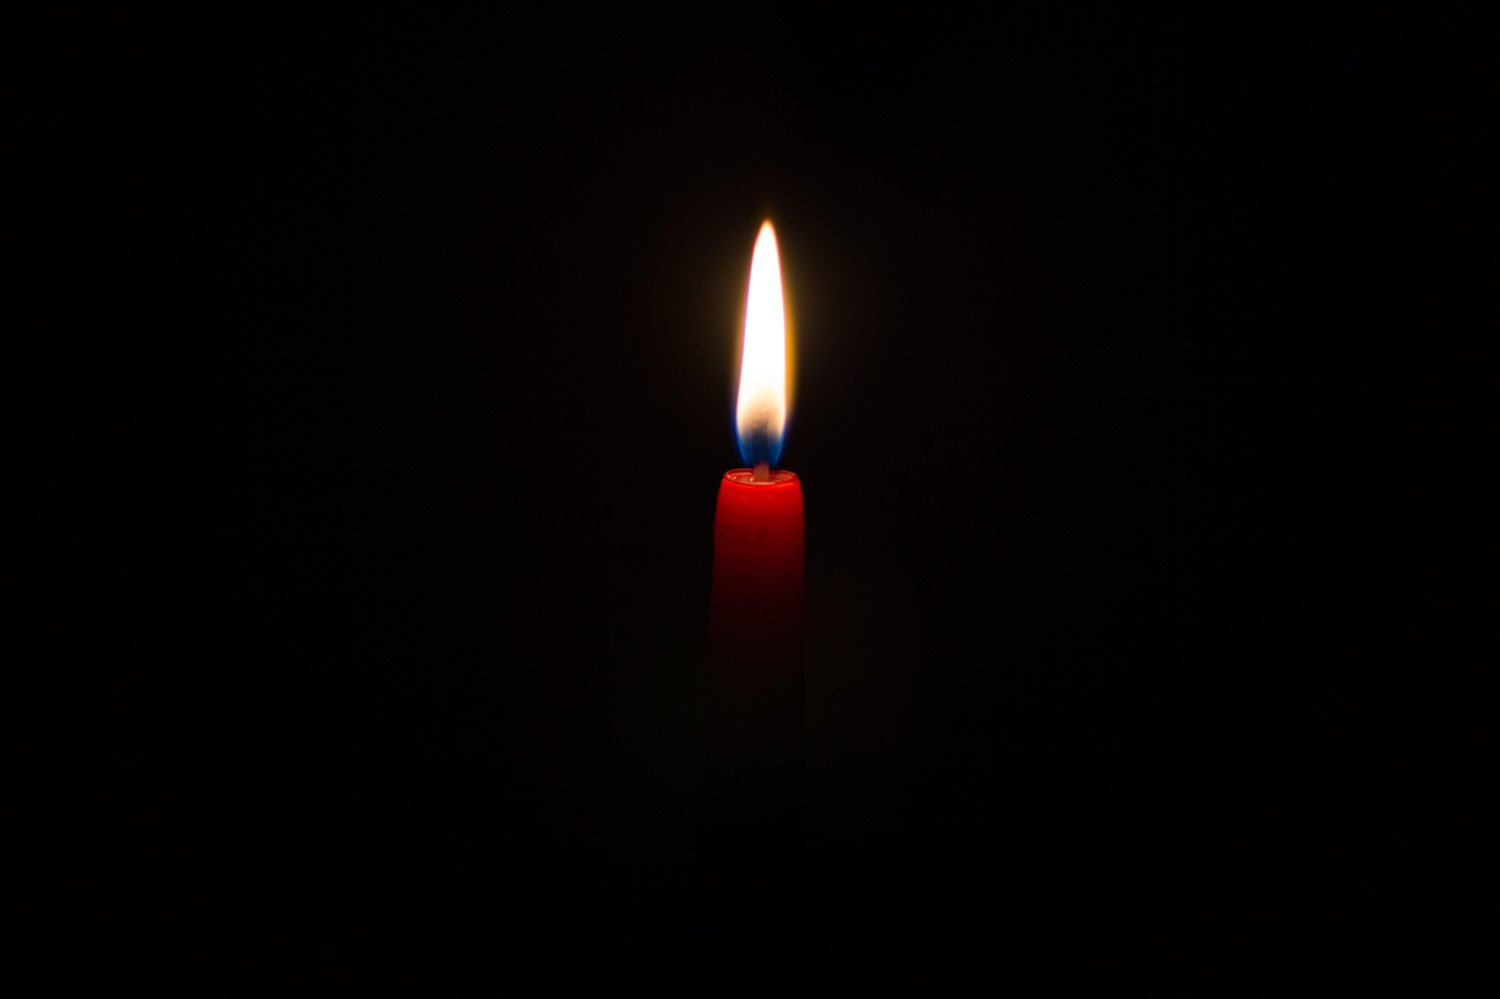 Bereavement & grief signified by a burning candle